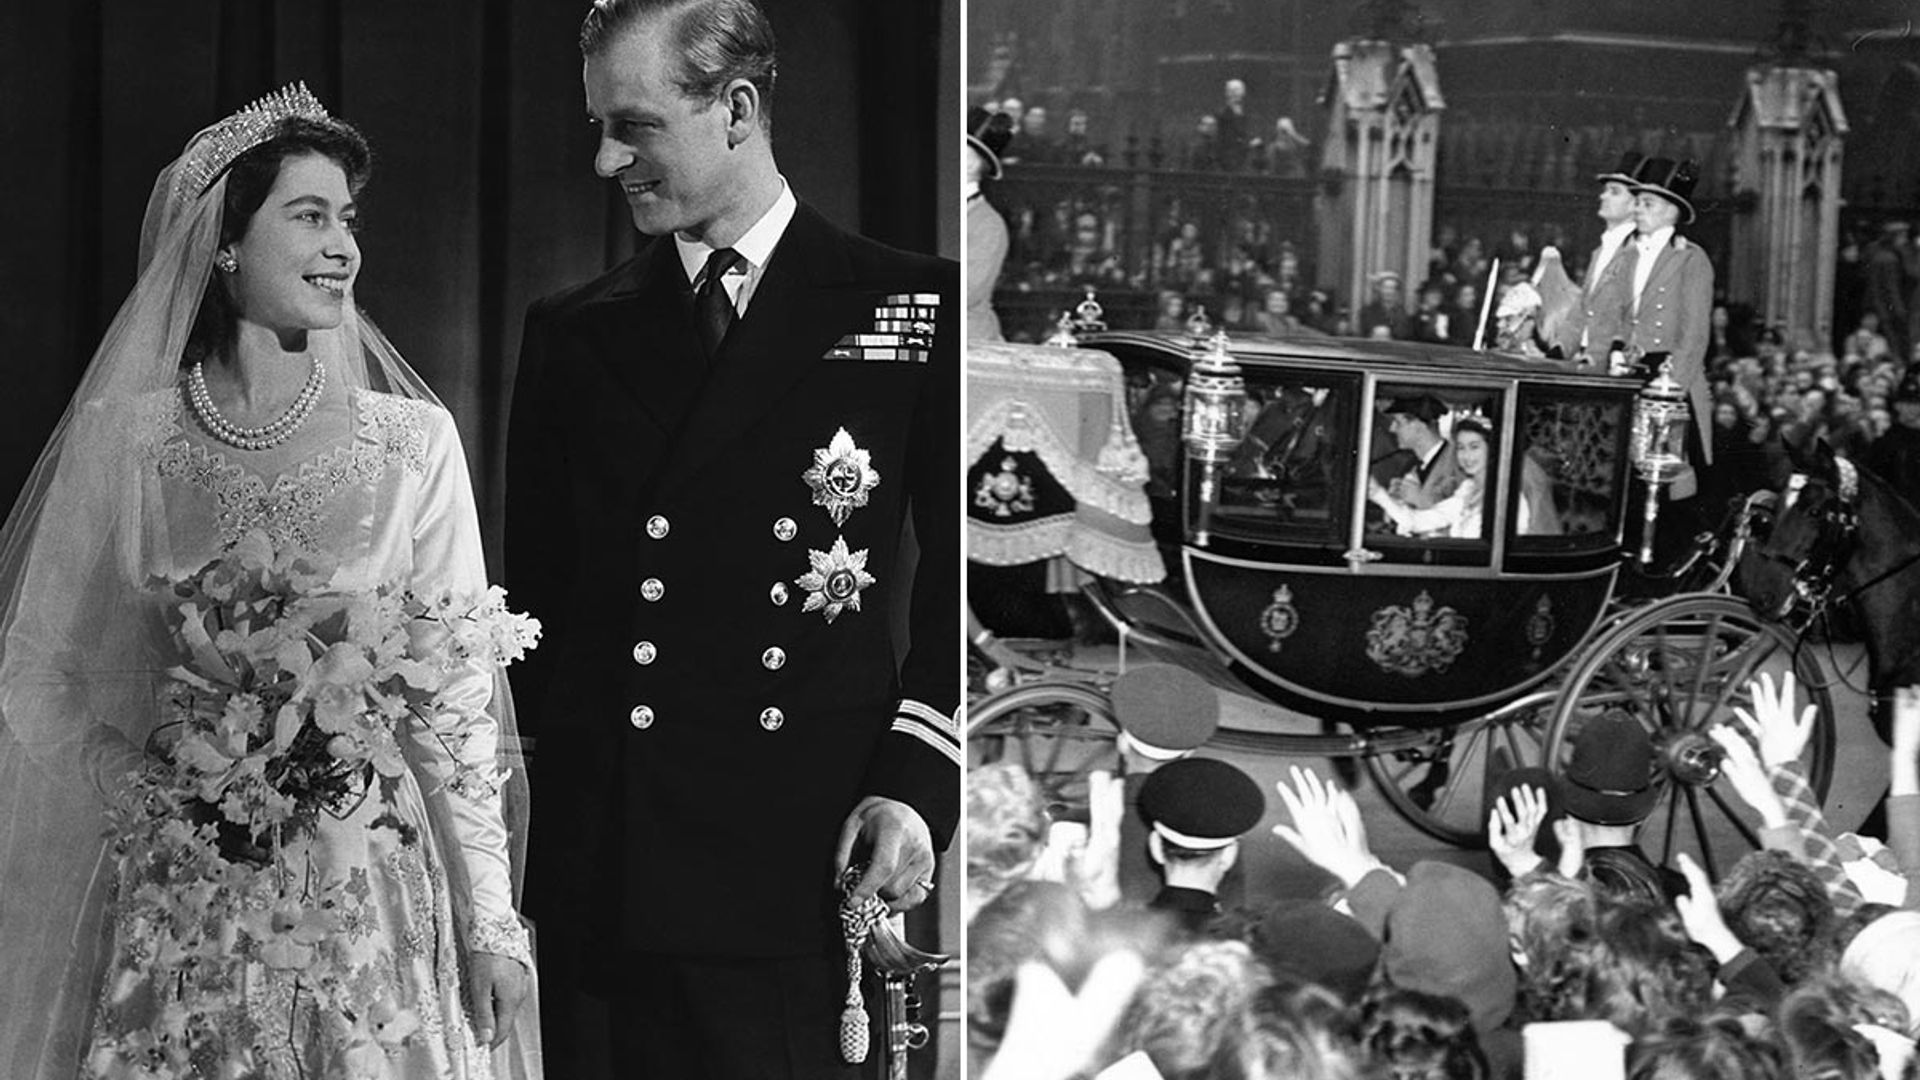 The Queen and Prince Philip's historic royal wedding photos will bring a tear to your eye